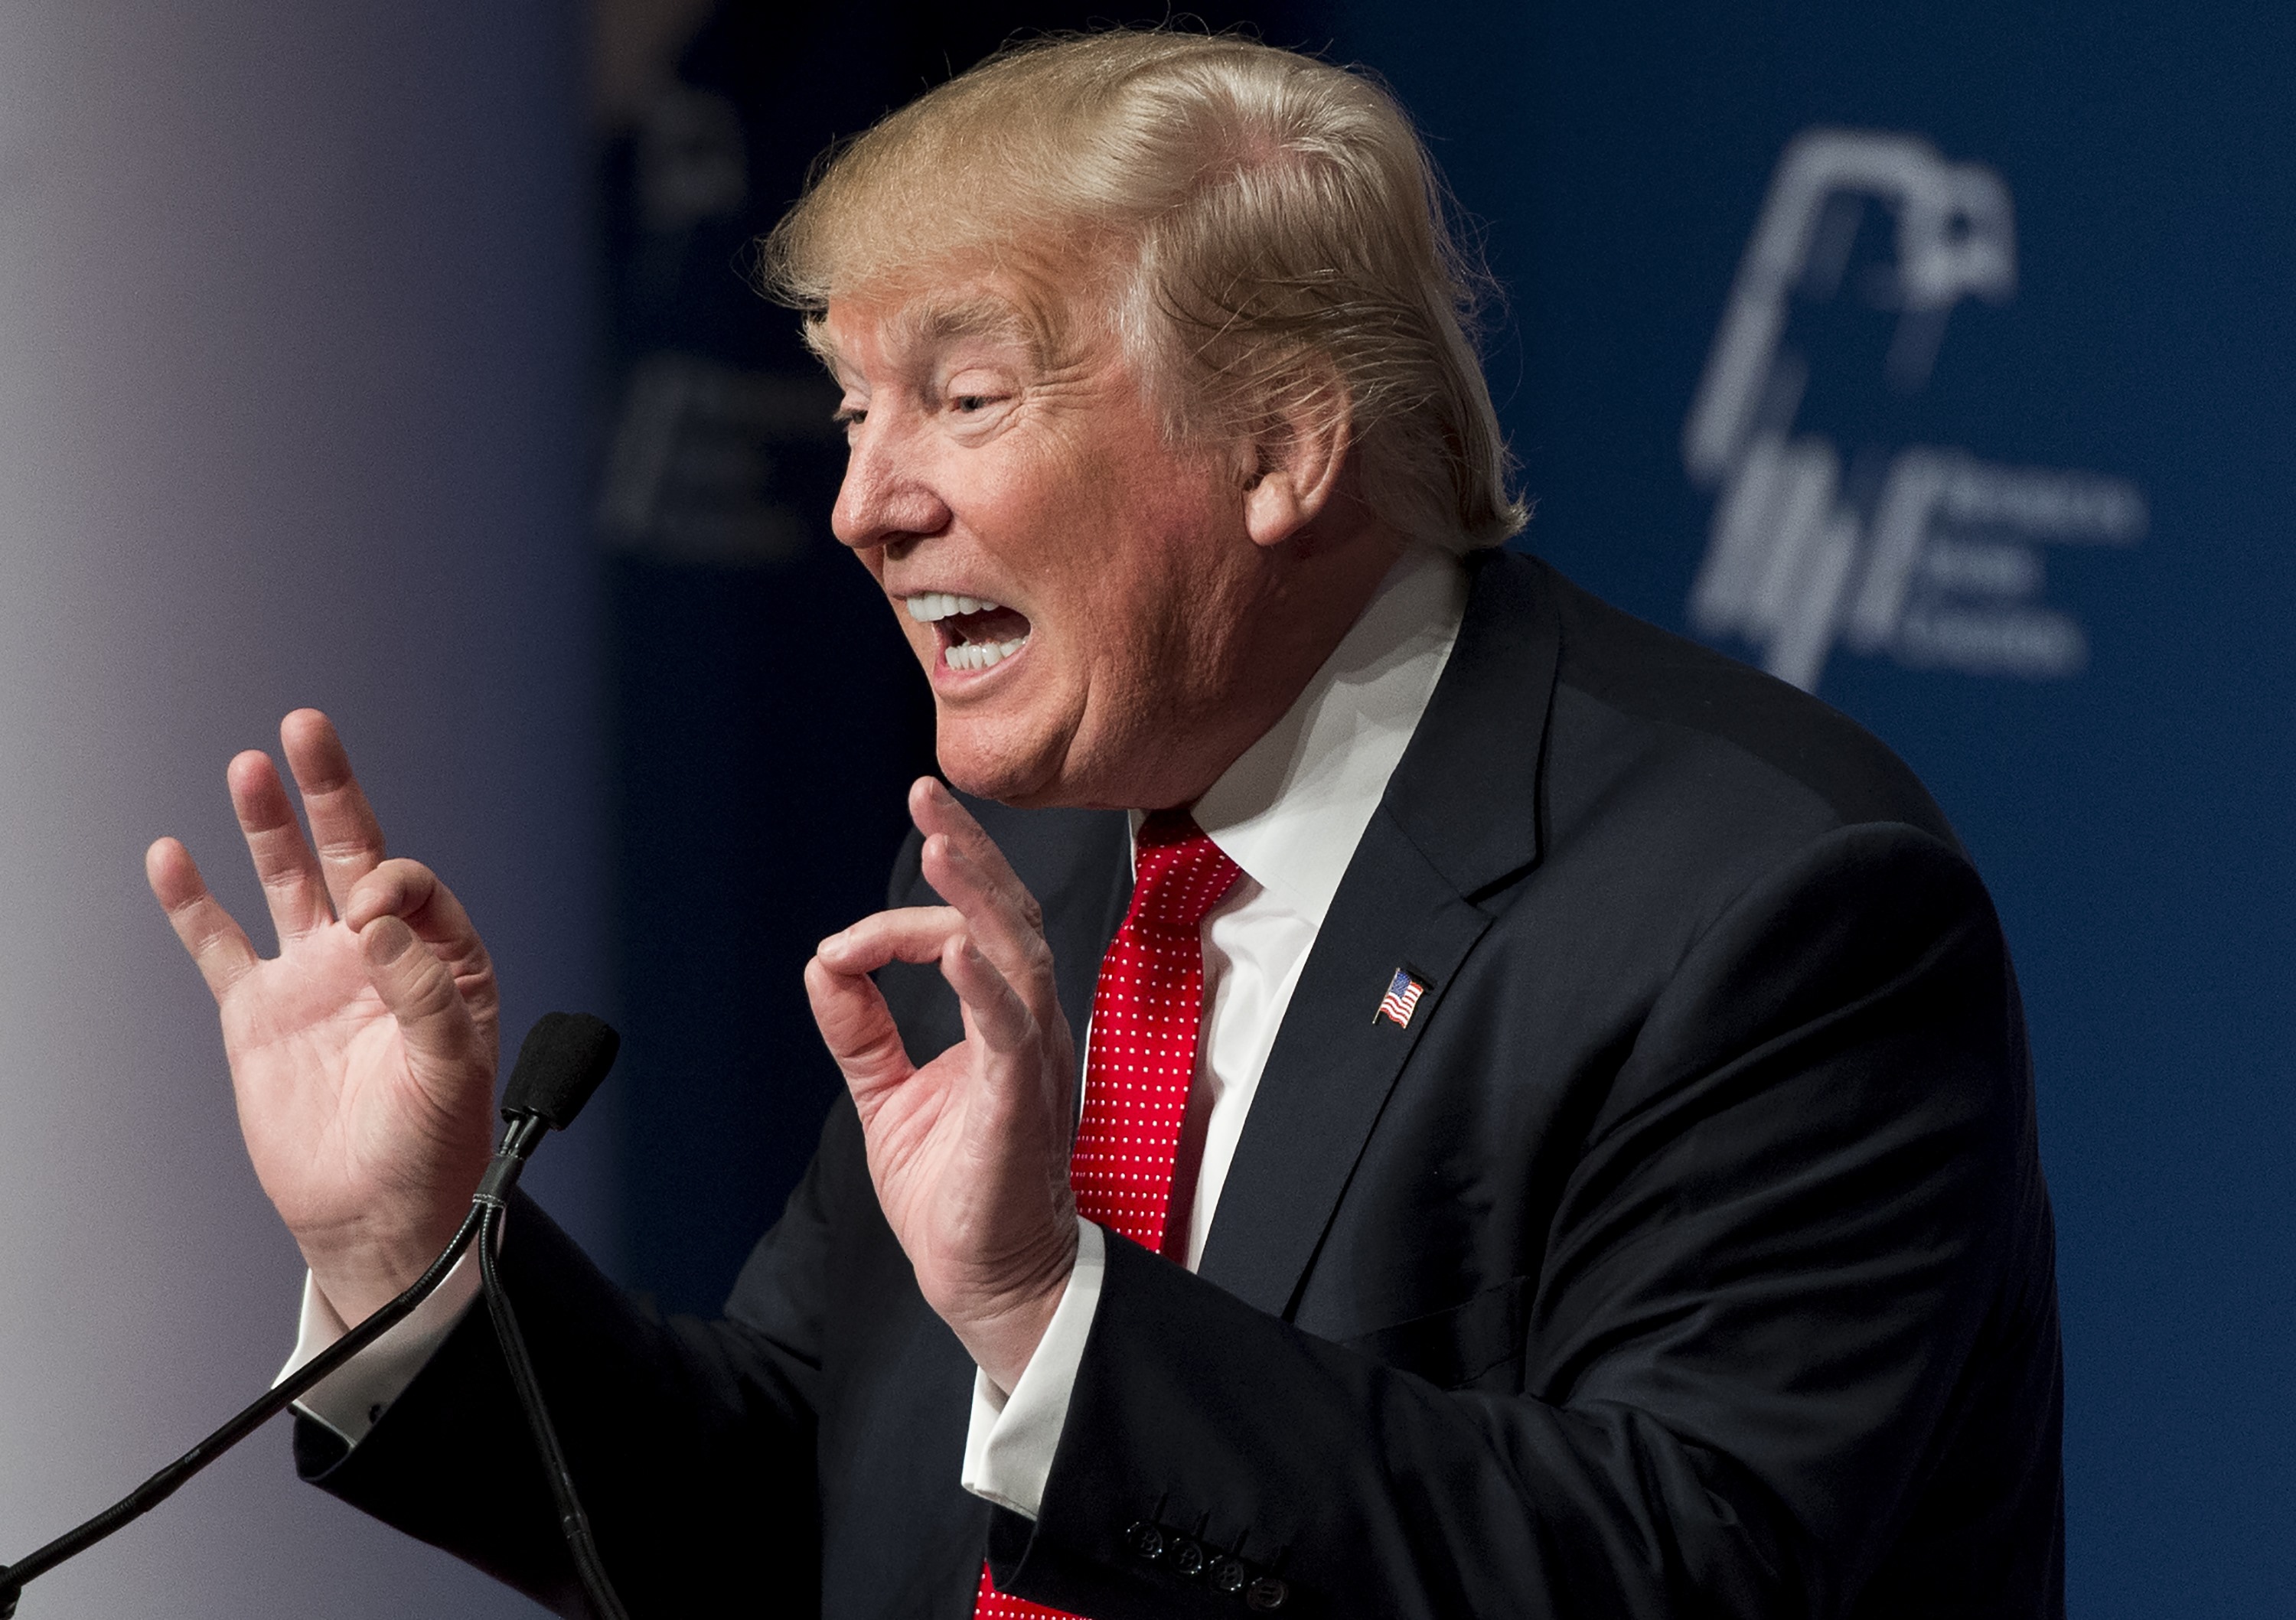 Republican Presidential hopeful Donald Trump speaks during the 2016 Republican Jewish Coalition Presidential Candidates Forum in Washington on Dec. 3, 2015. (SAUL LOEB&mdash;AFP/Getty Images)